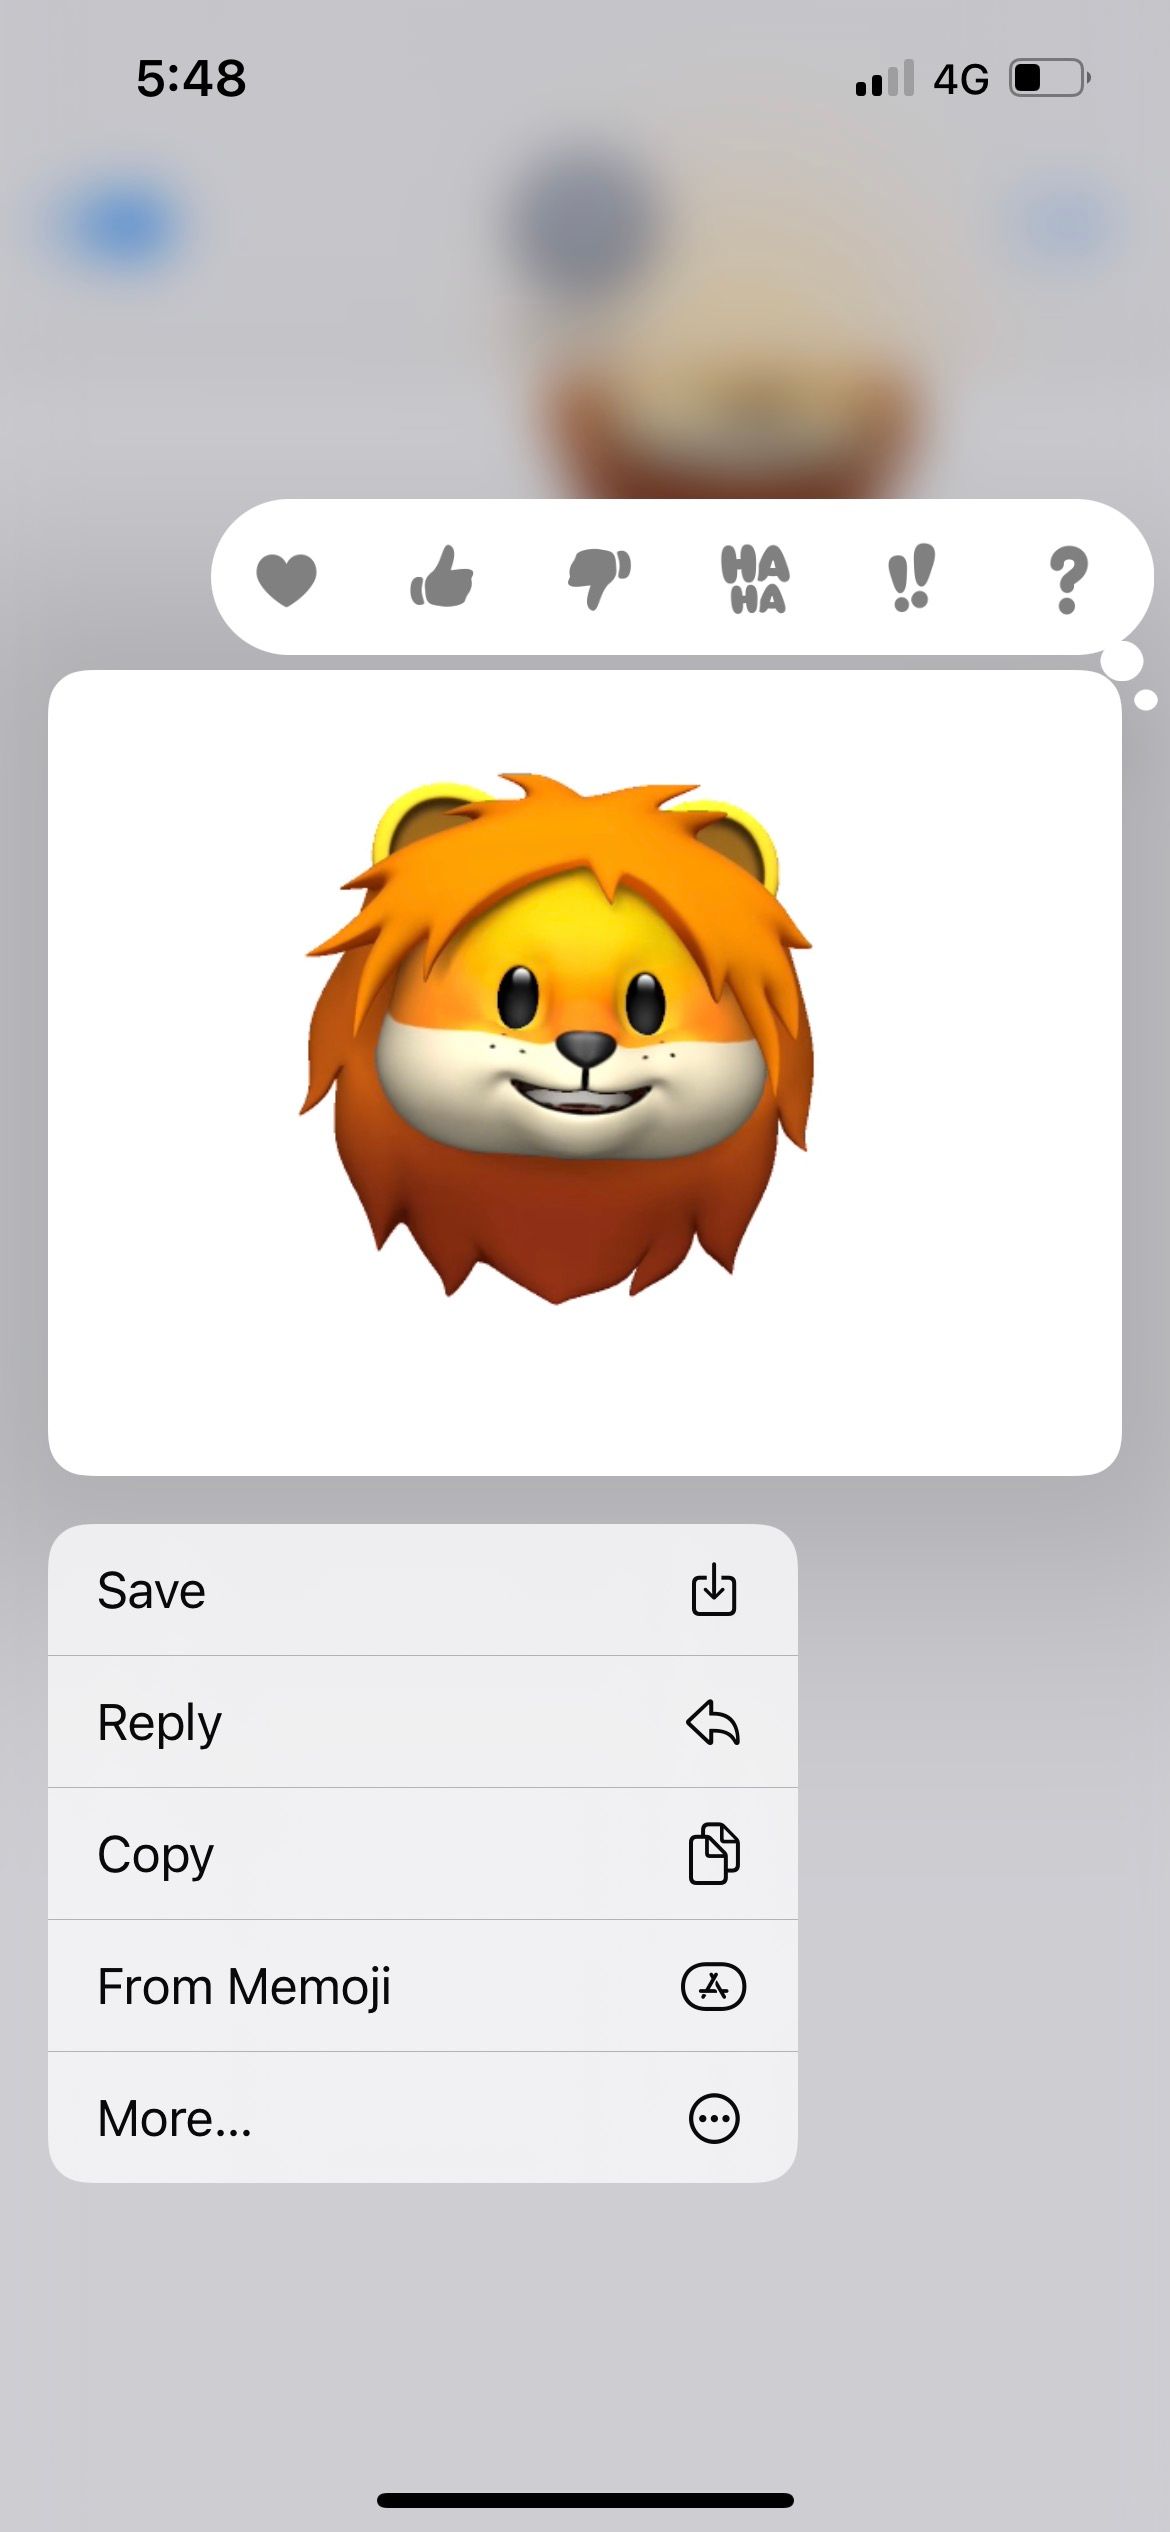 save lion animoji video from iphone messages app